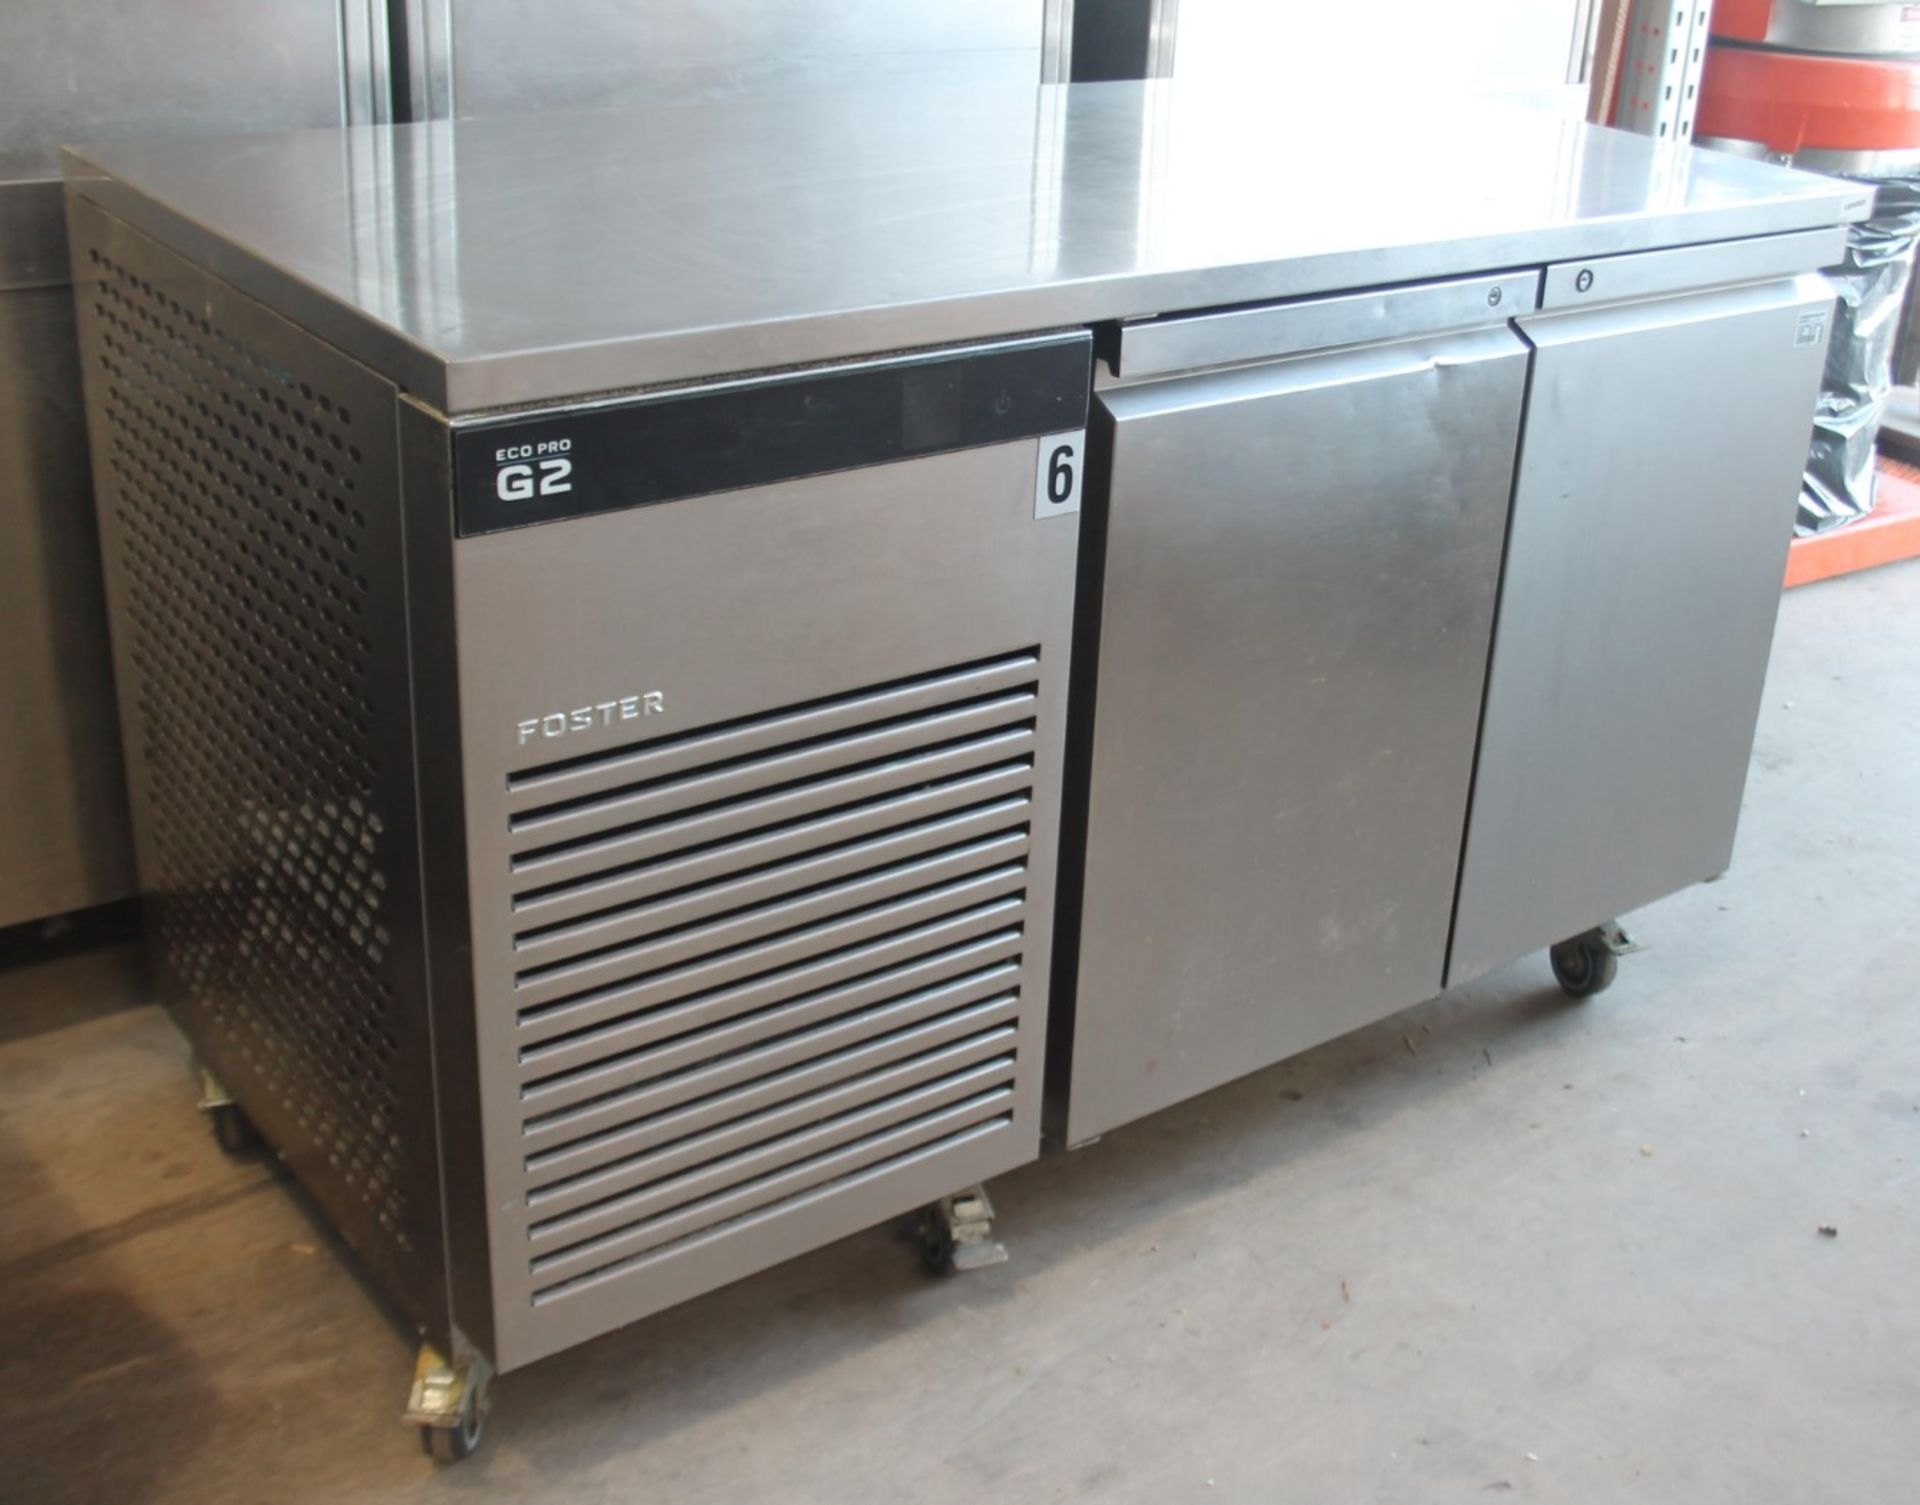 1 x Fosters EcoPro G2 2-Door Commercial Refrigerated Counter - Ref: GEN585 WH2 - CL802 UX